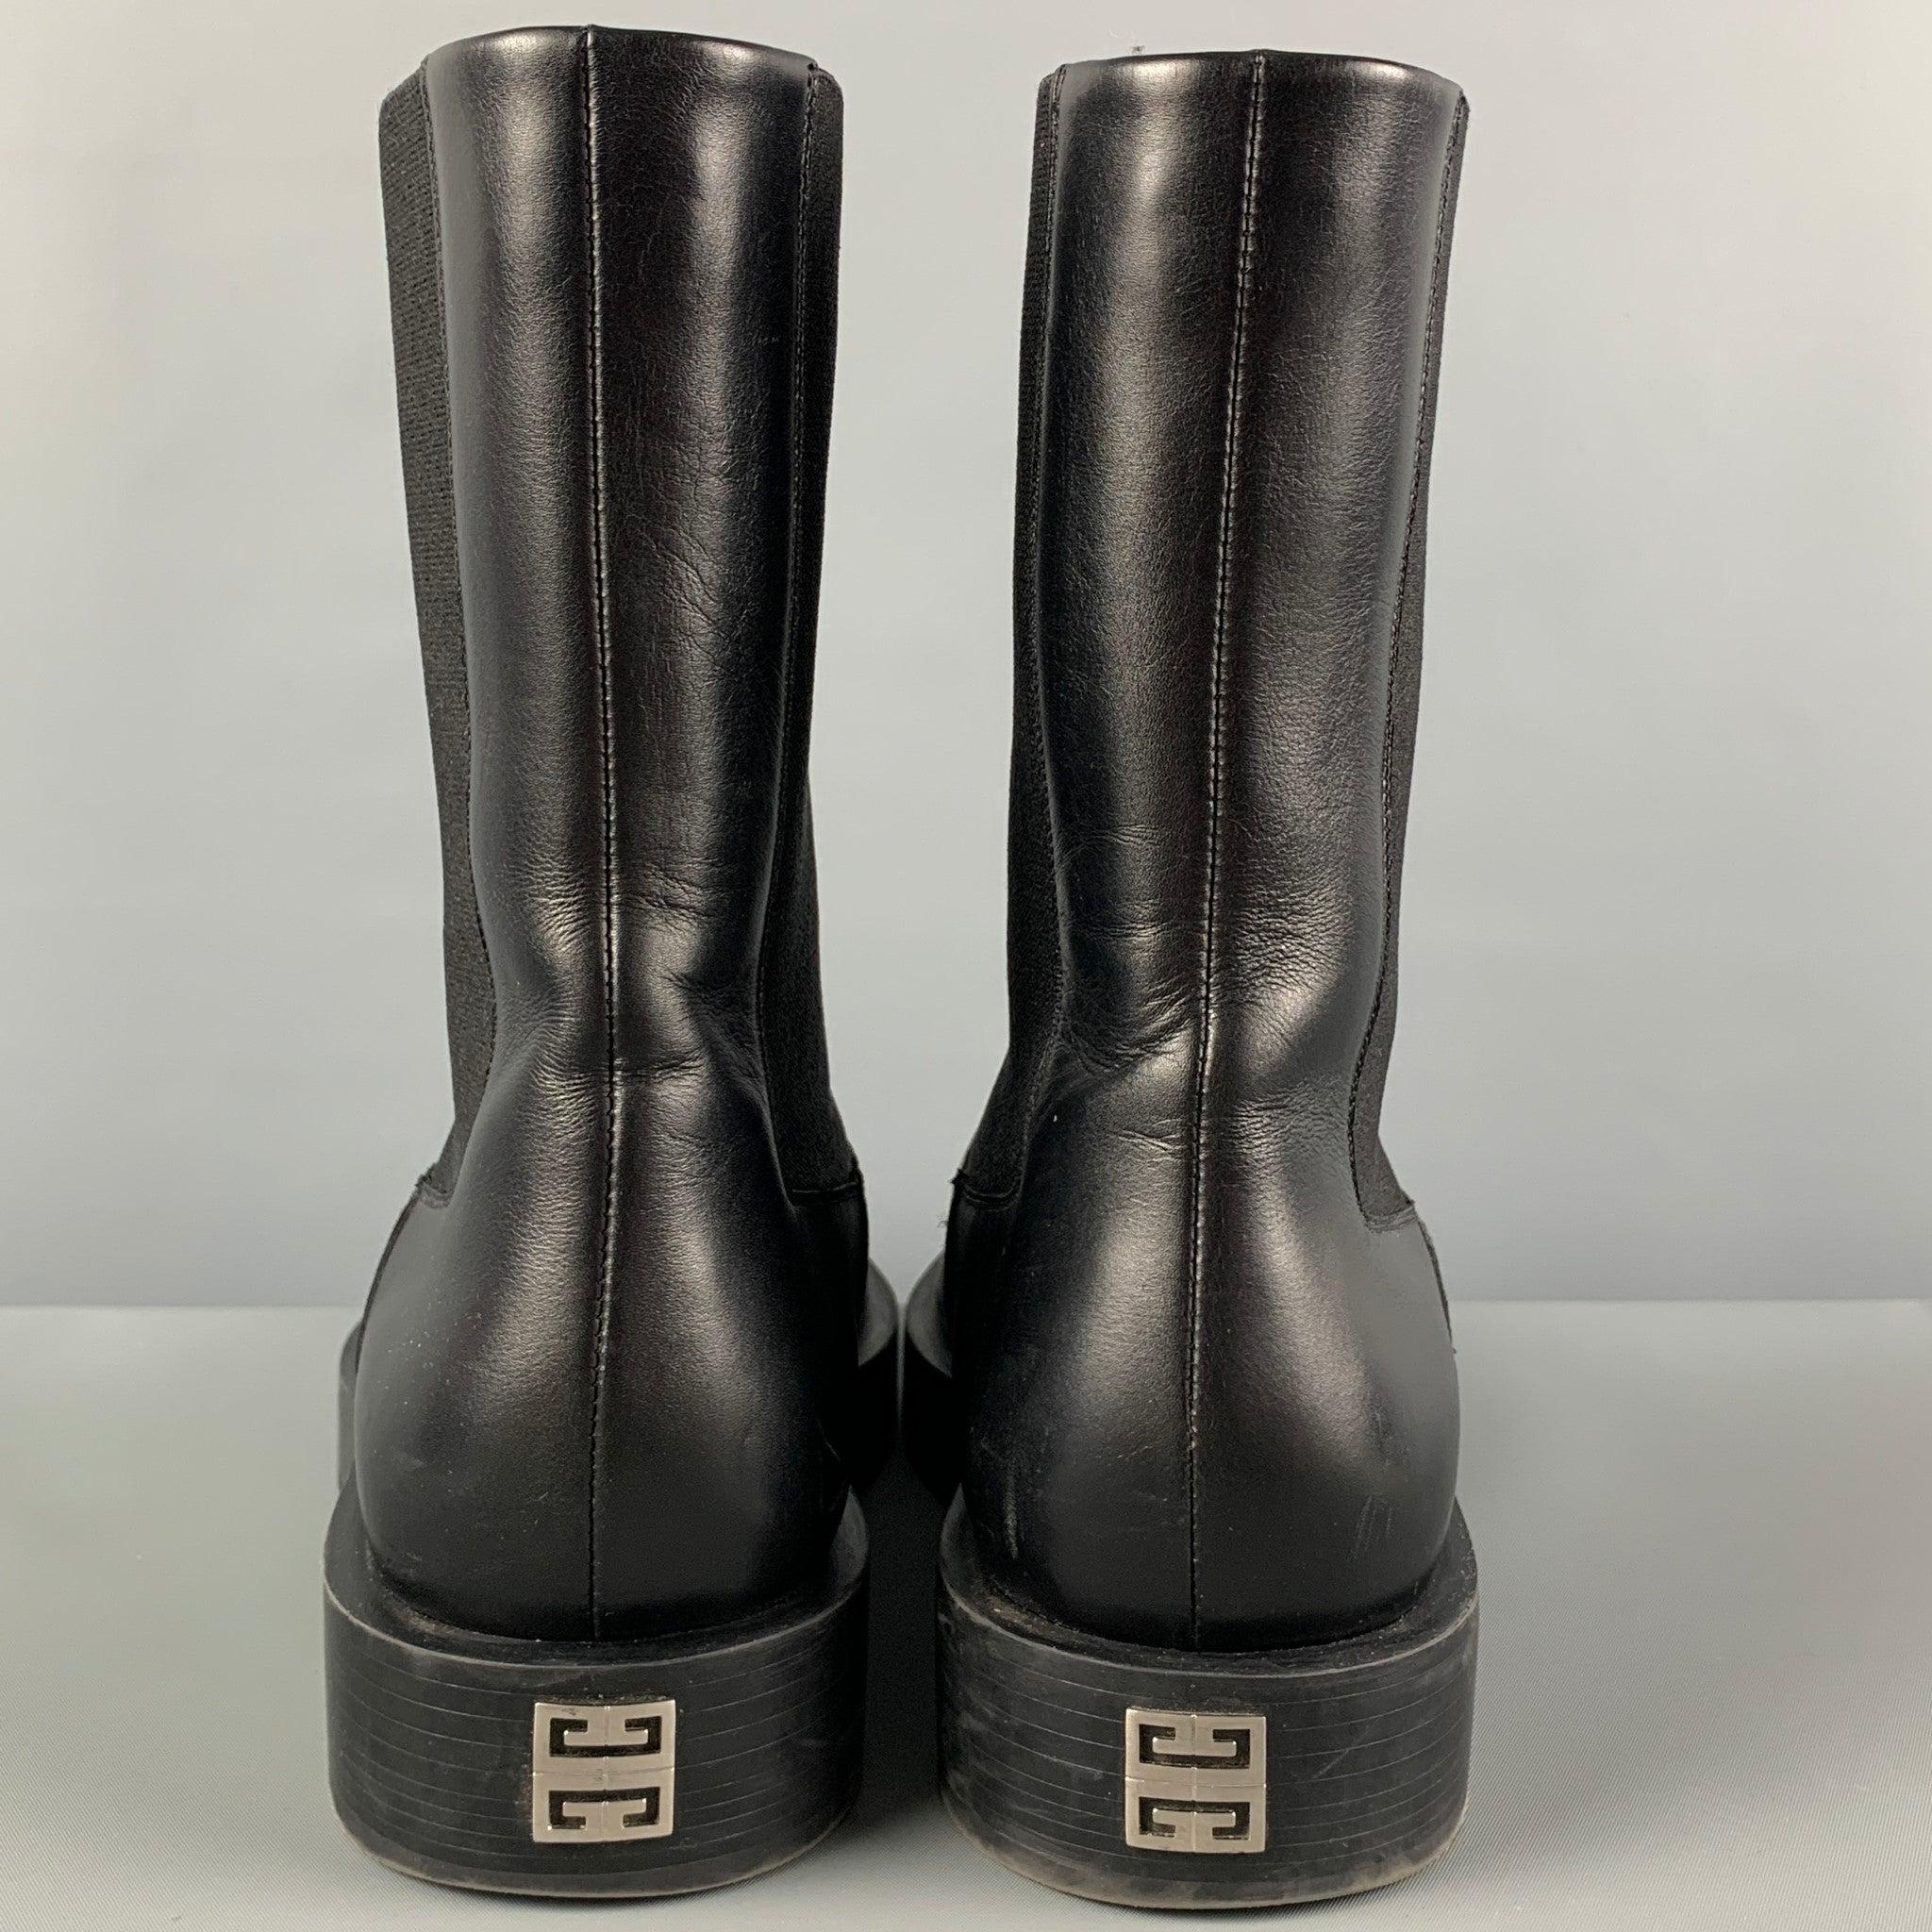 GIVENCHY boots comes in a black leather featuring a square toe, bacl metal plaque, and a chelsea style. Made in Italy.
Very Good
Pre-Owned Condition. Light wear. As-is.  

Marked:   SA 0231 41 

Measurements: 
  Length: 11.75 inches Width: 4.5